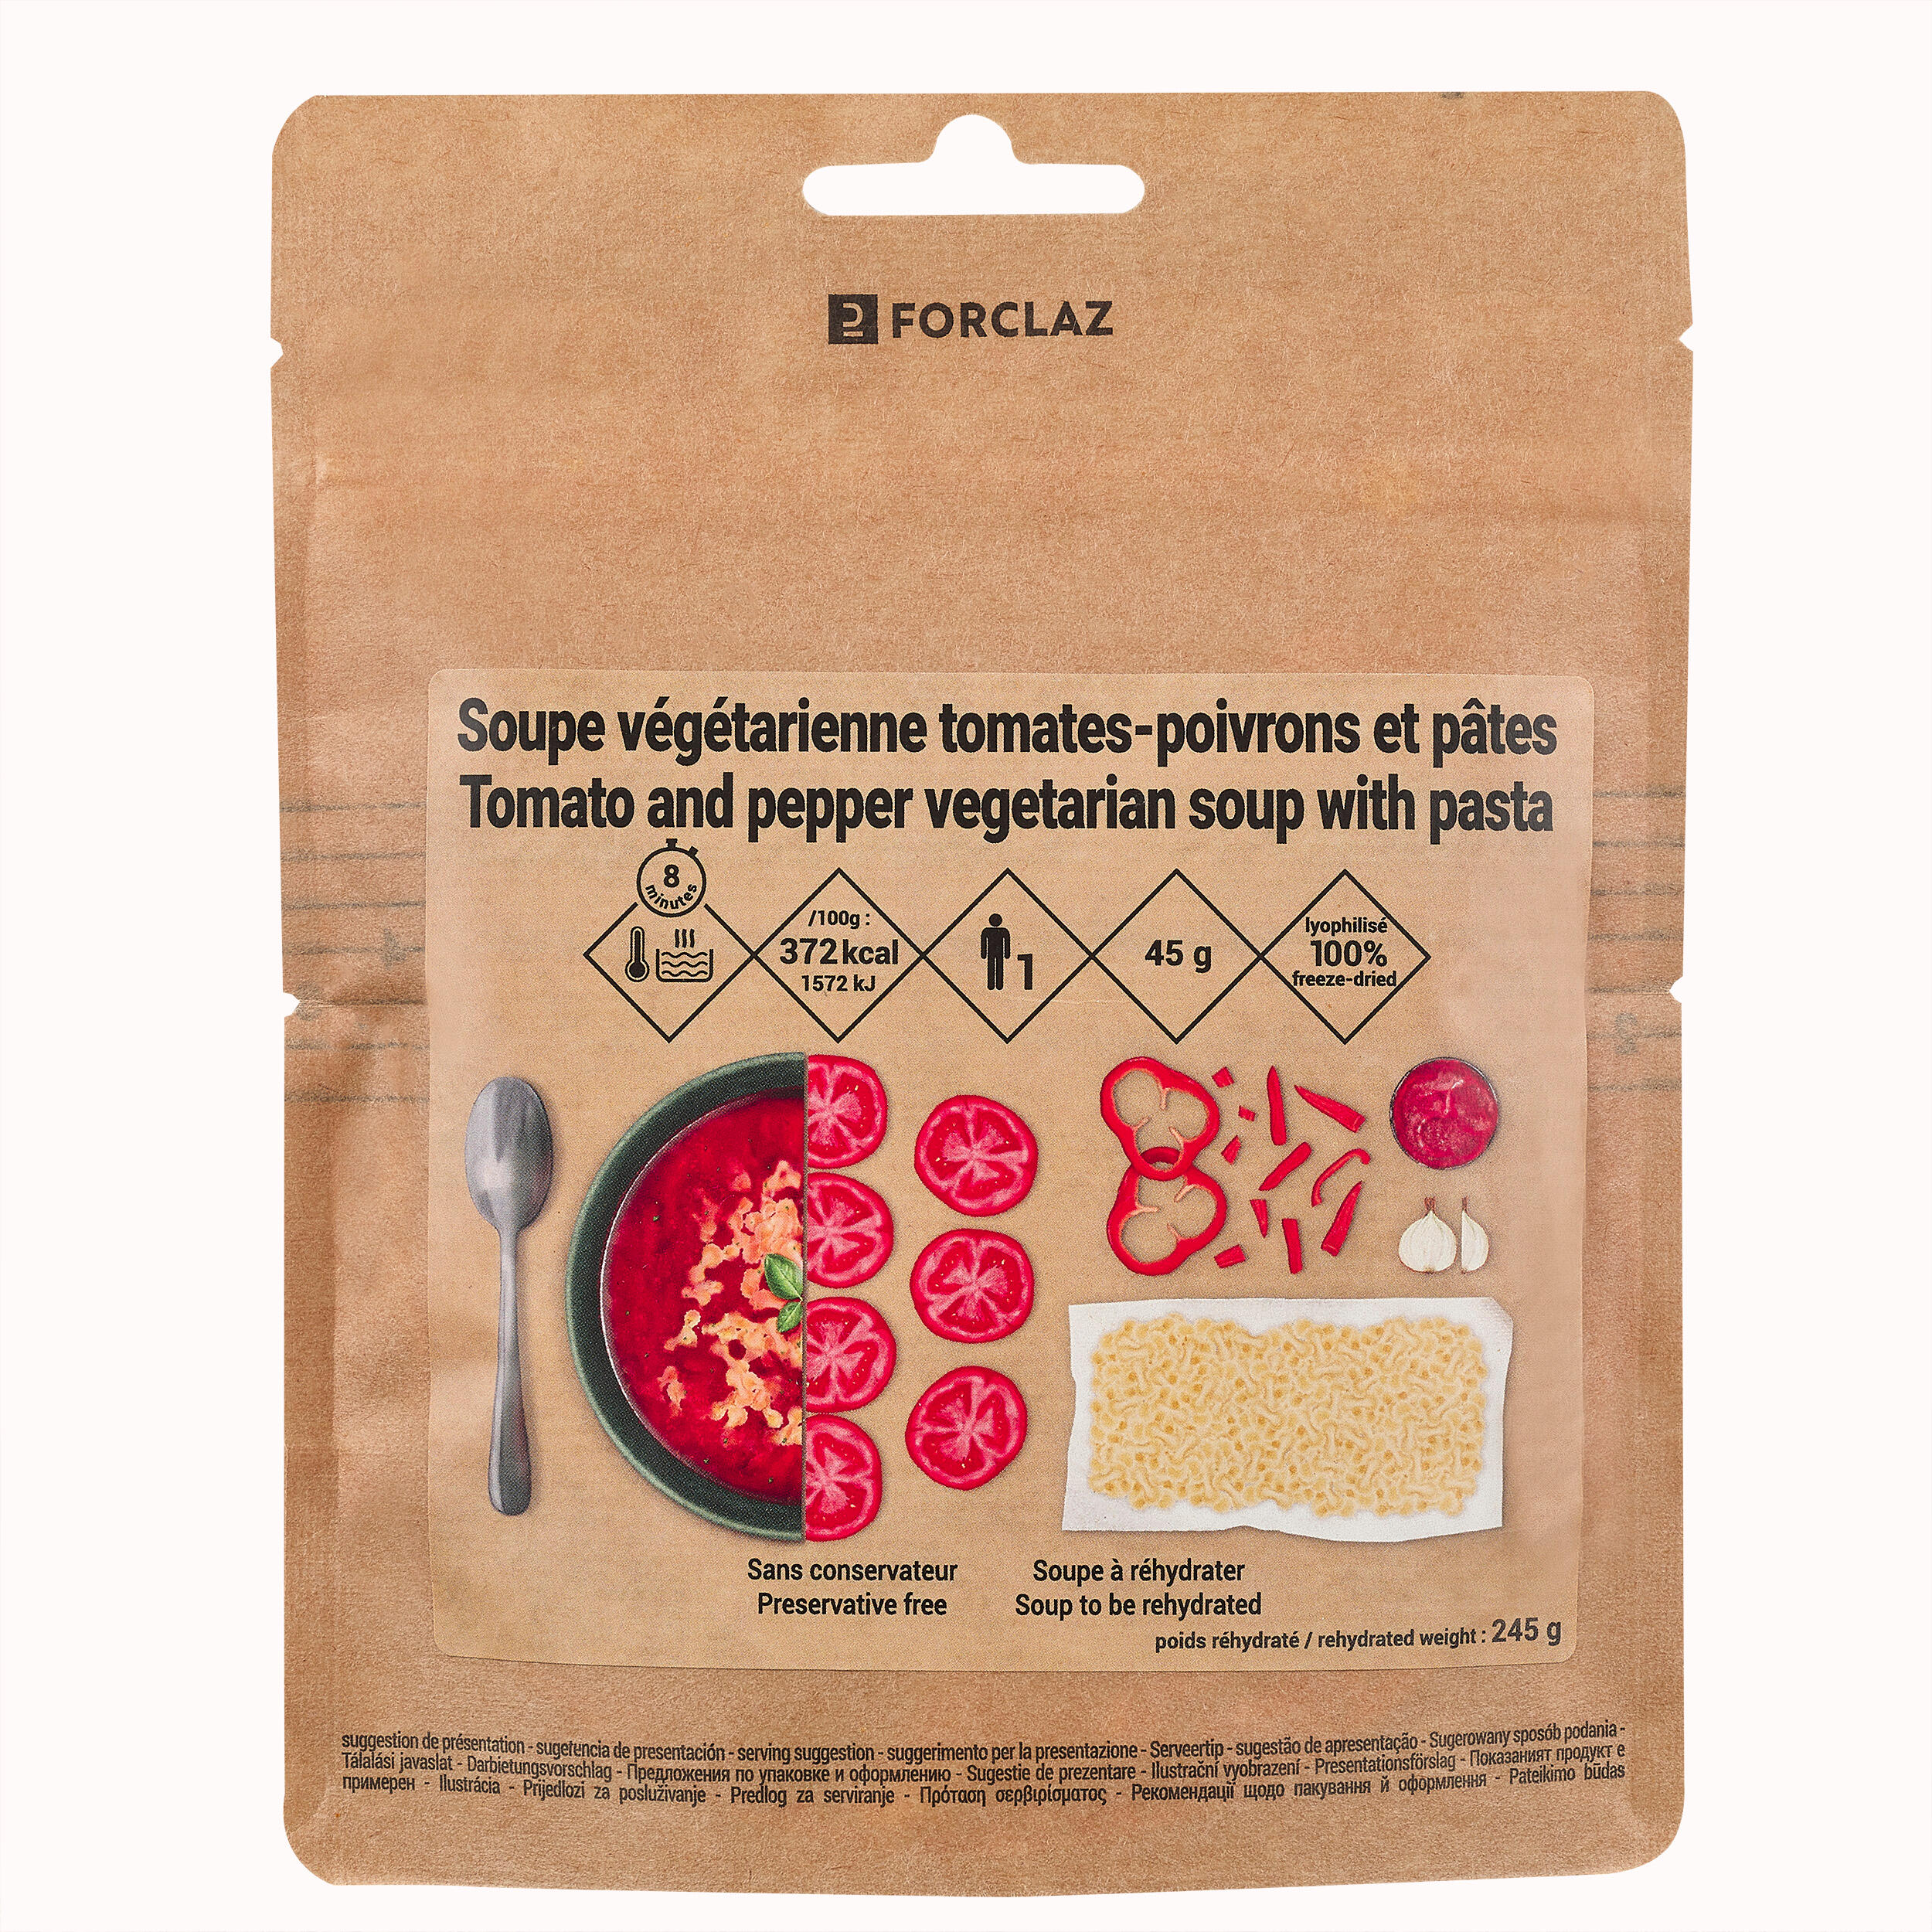 Freeze-dried Vegetarian Soup - Tomato Sweet Pepper Pasta - 45 G